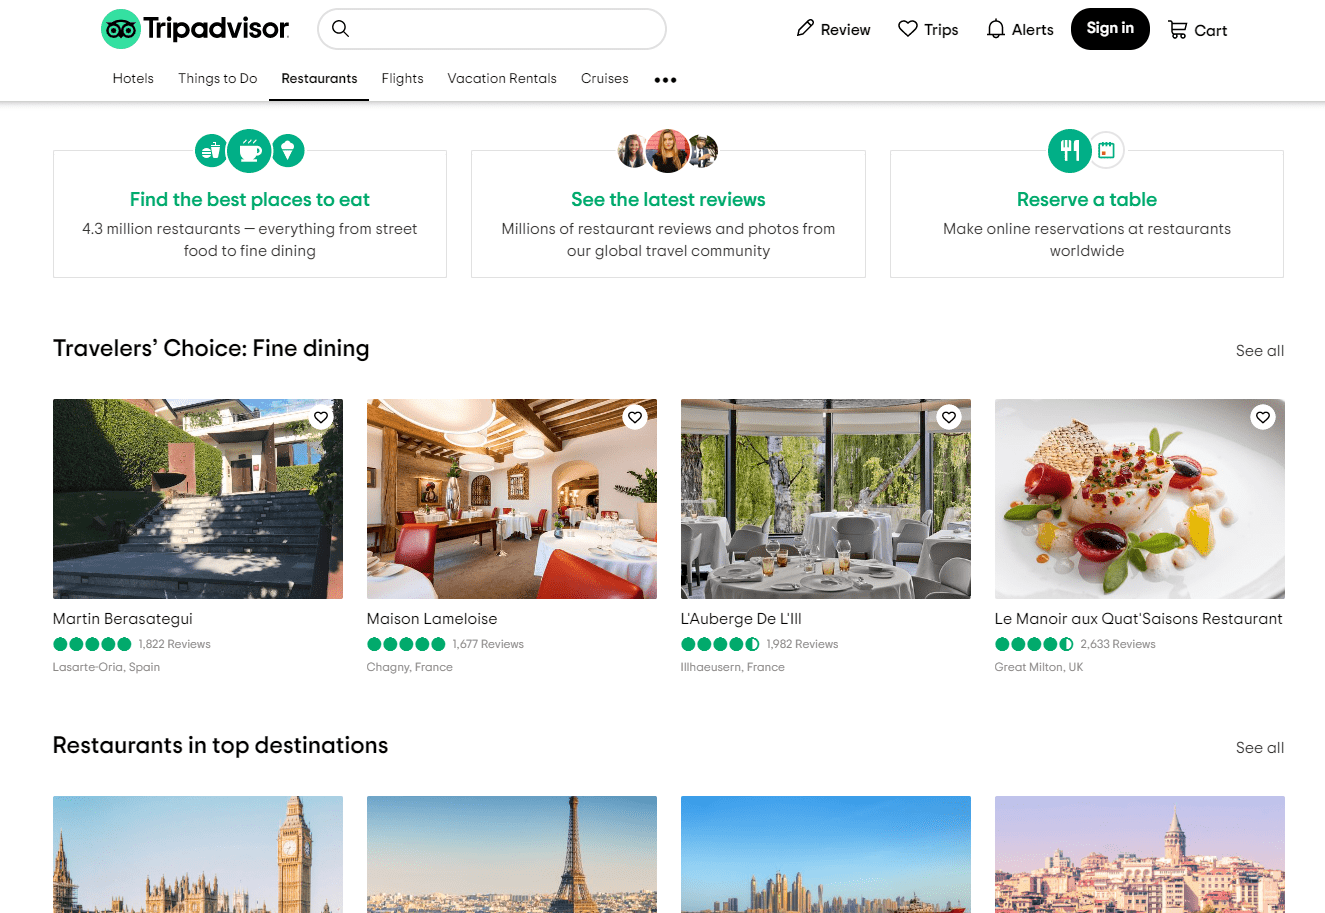 Tripadvisor is a typical directory example